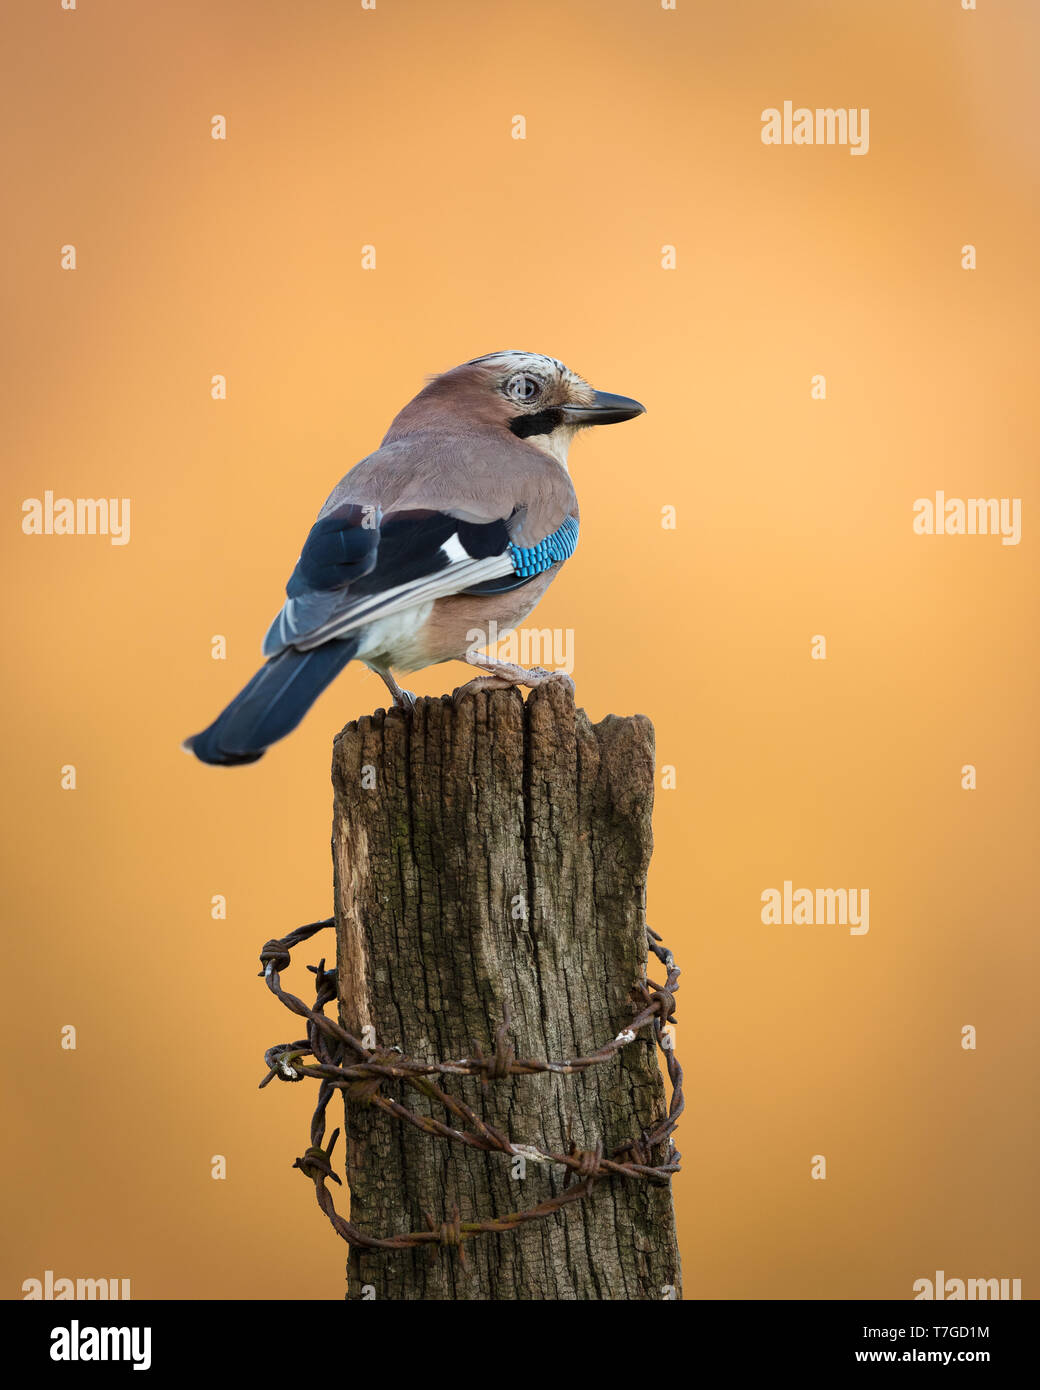 Jay perched on a wooden post at sunset Stock Photo